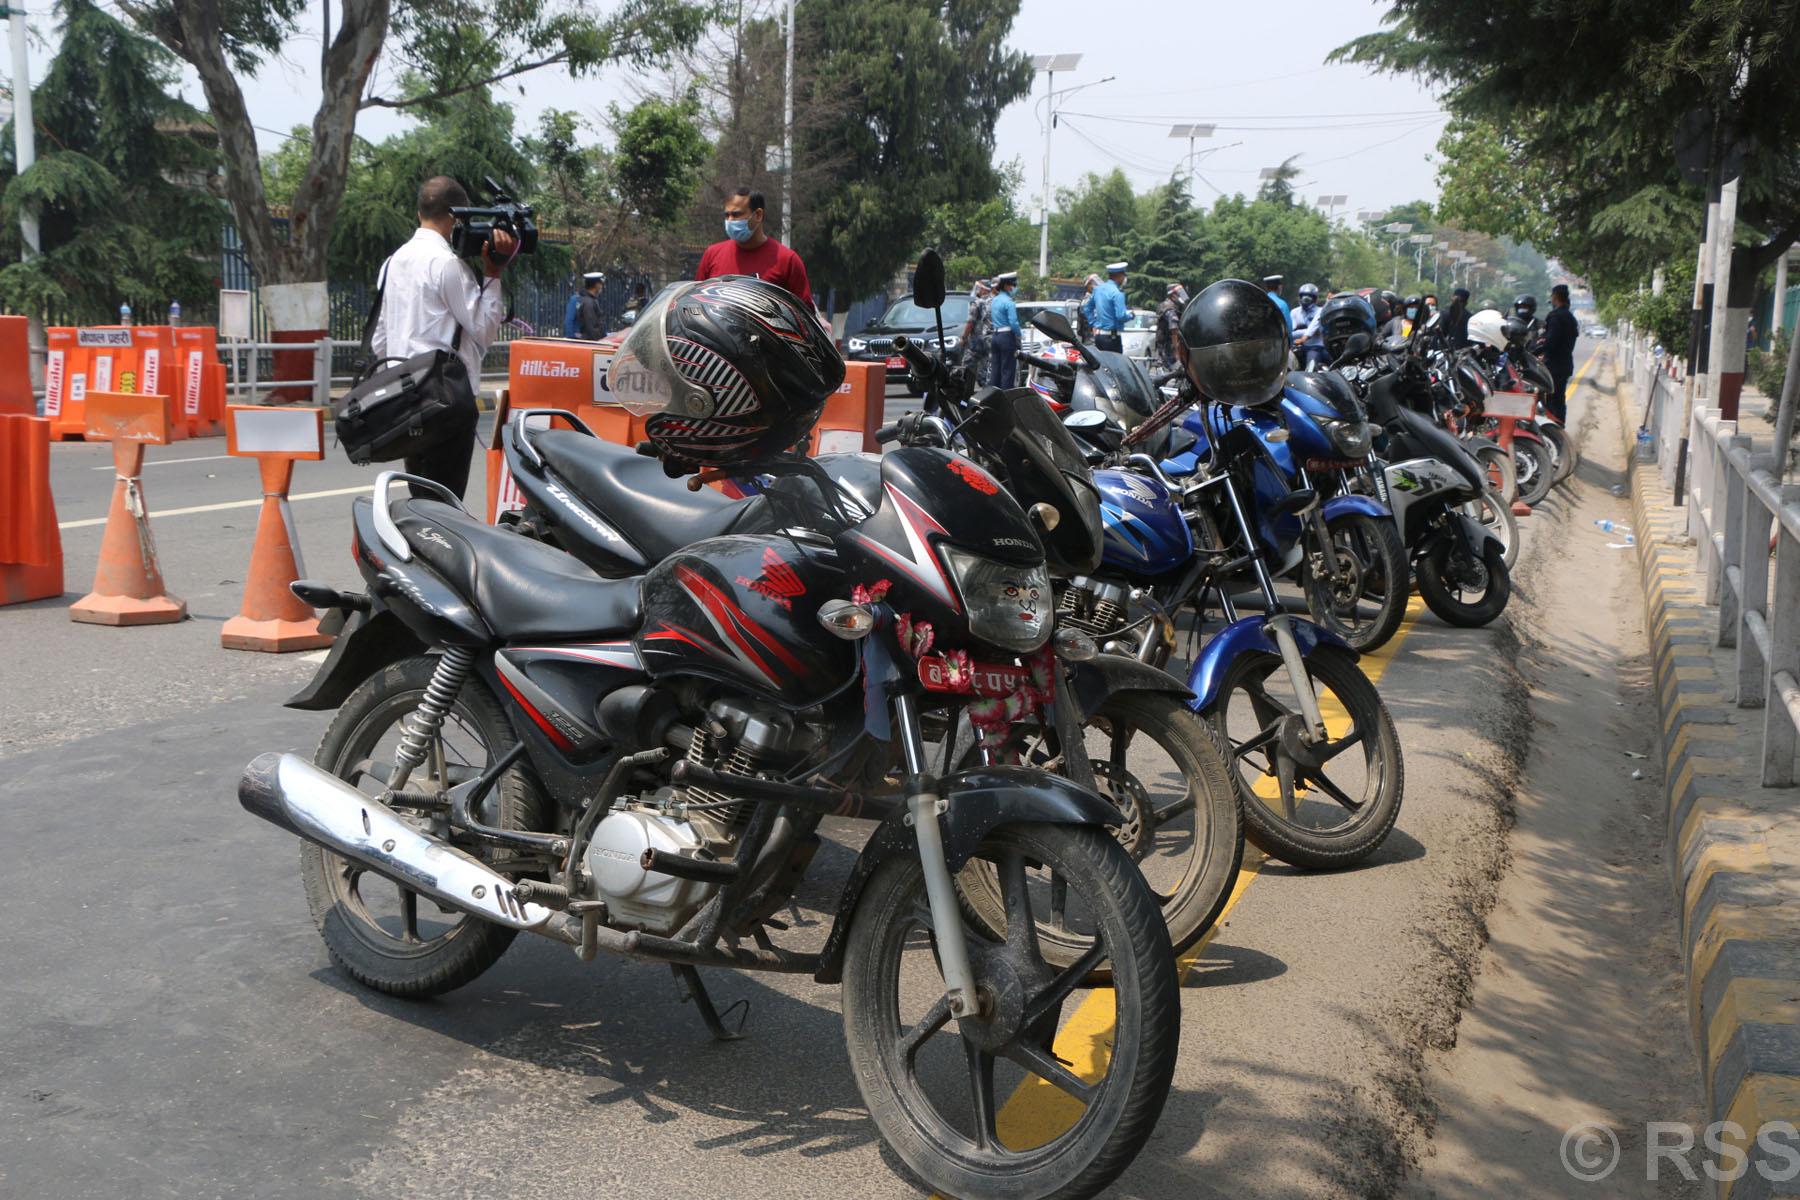 KMC bans parking in New Road area starting today